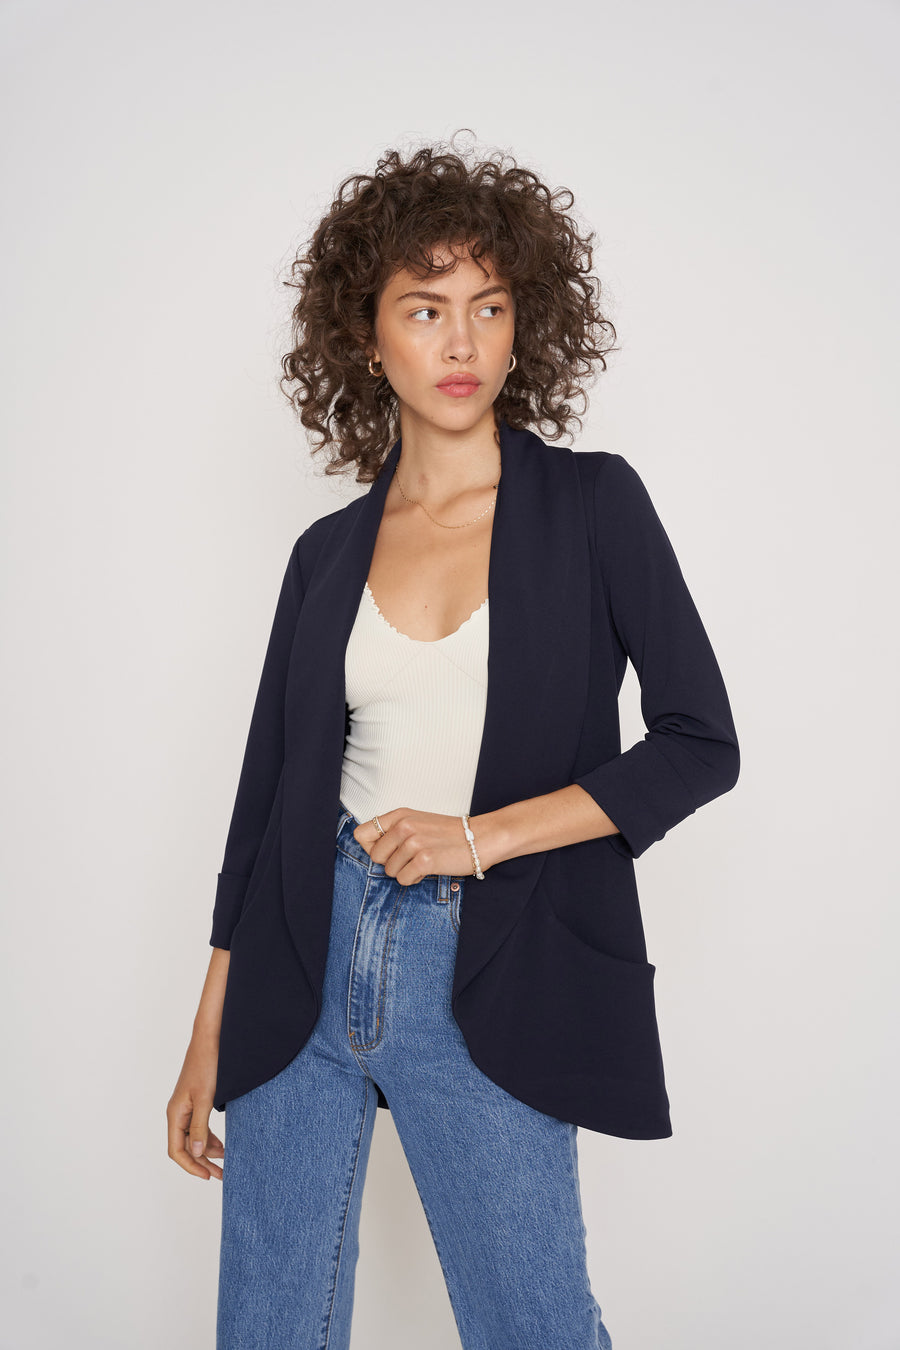 No Srcipt image - Images of 2 of 5 Classic Melanie Shawl Midnight Navy Color Staple Workwear Blazer